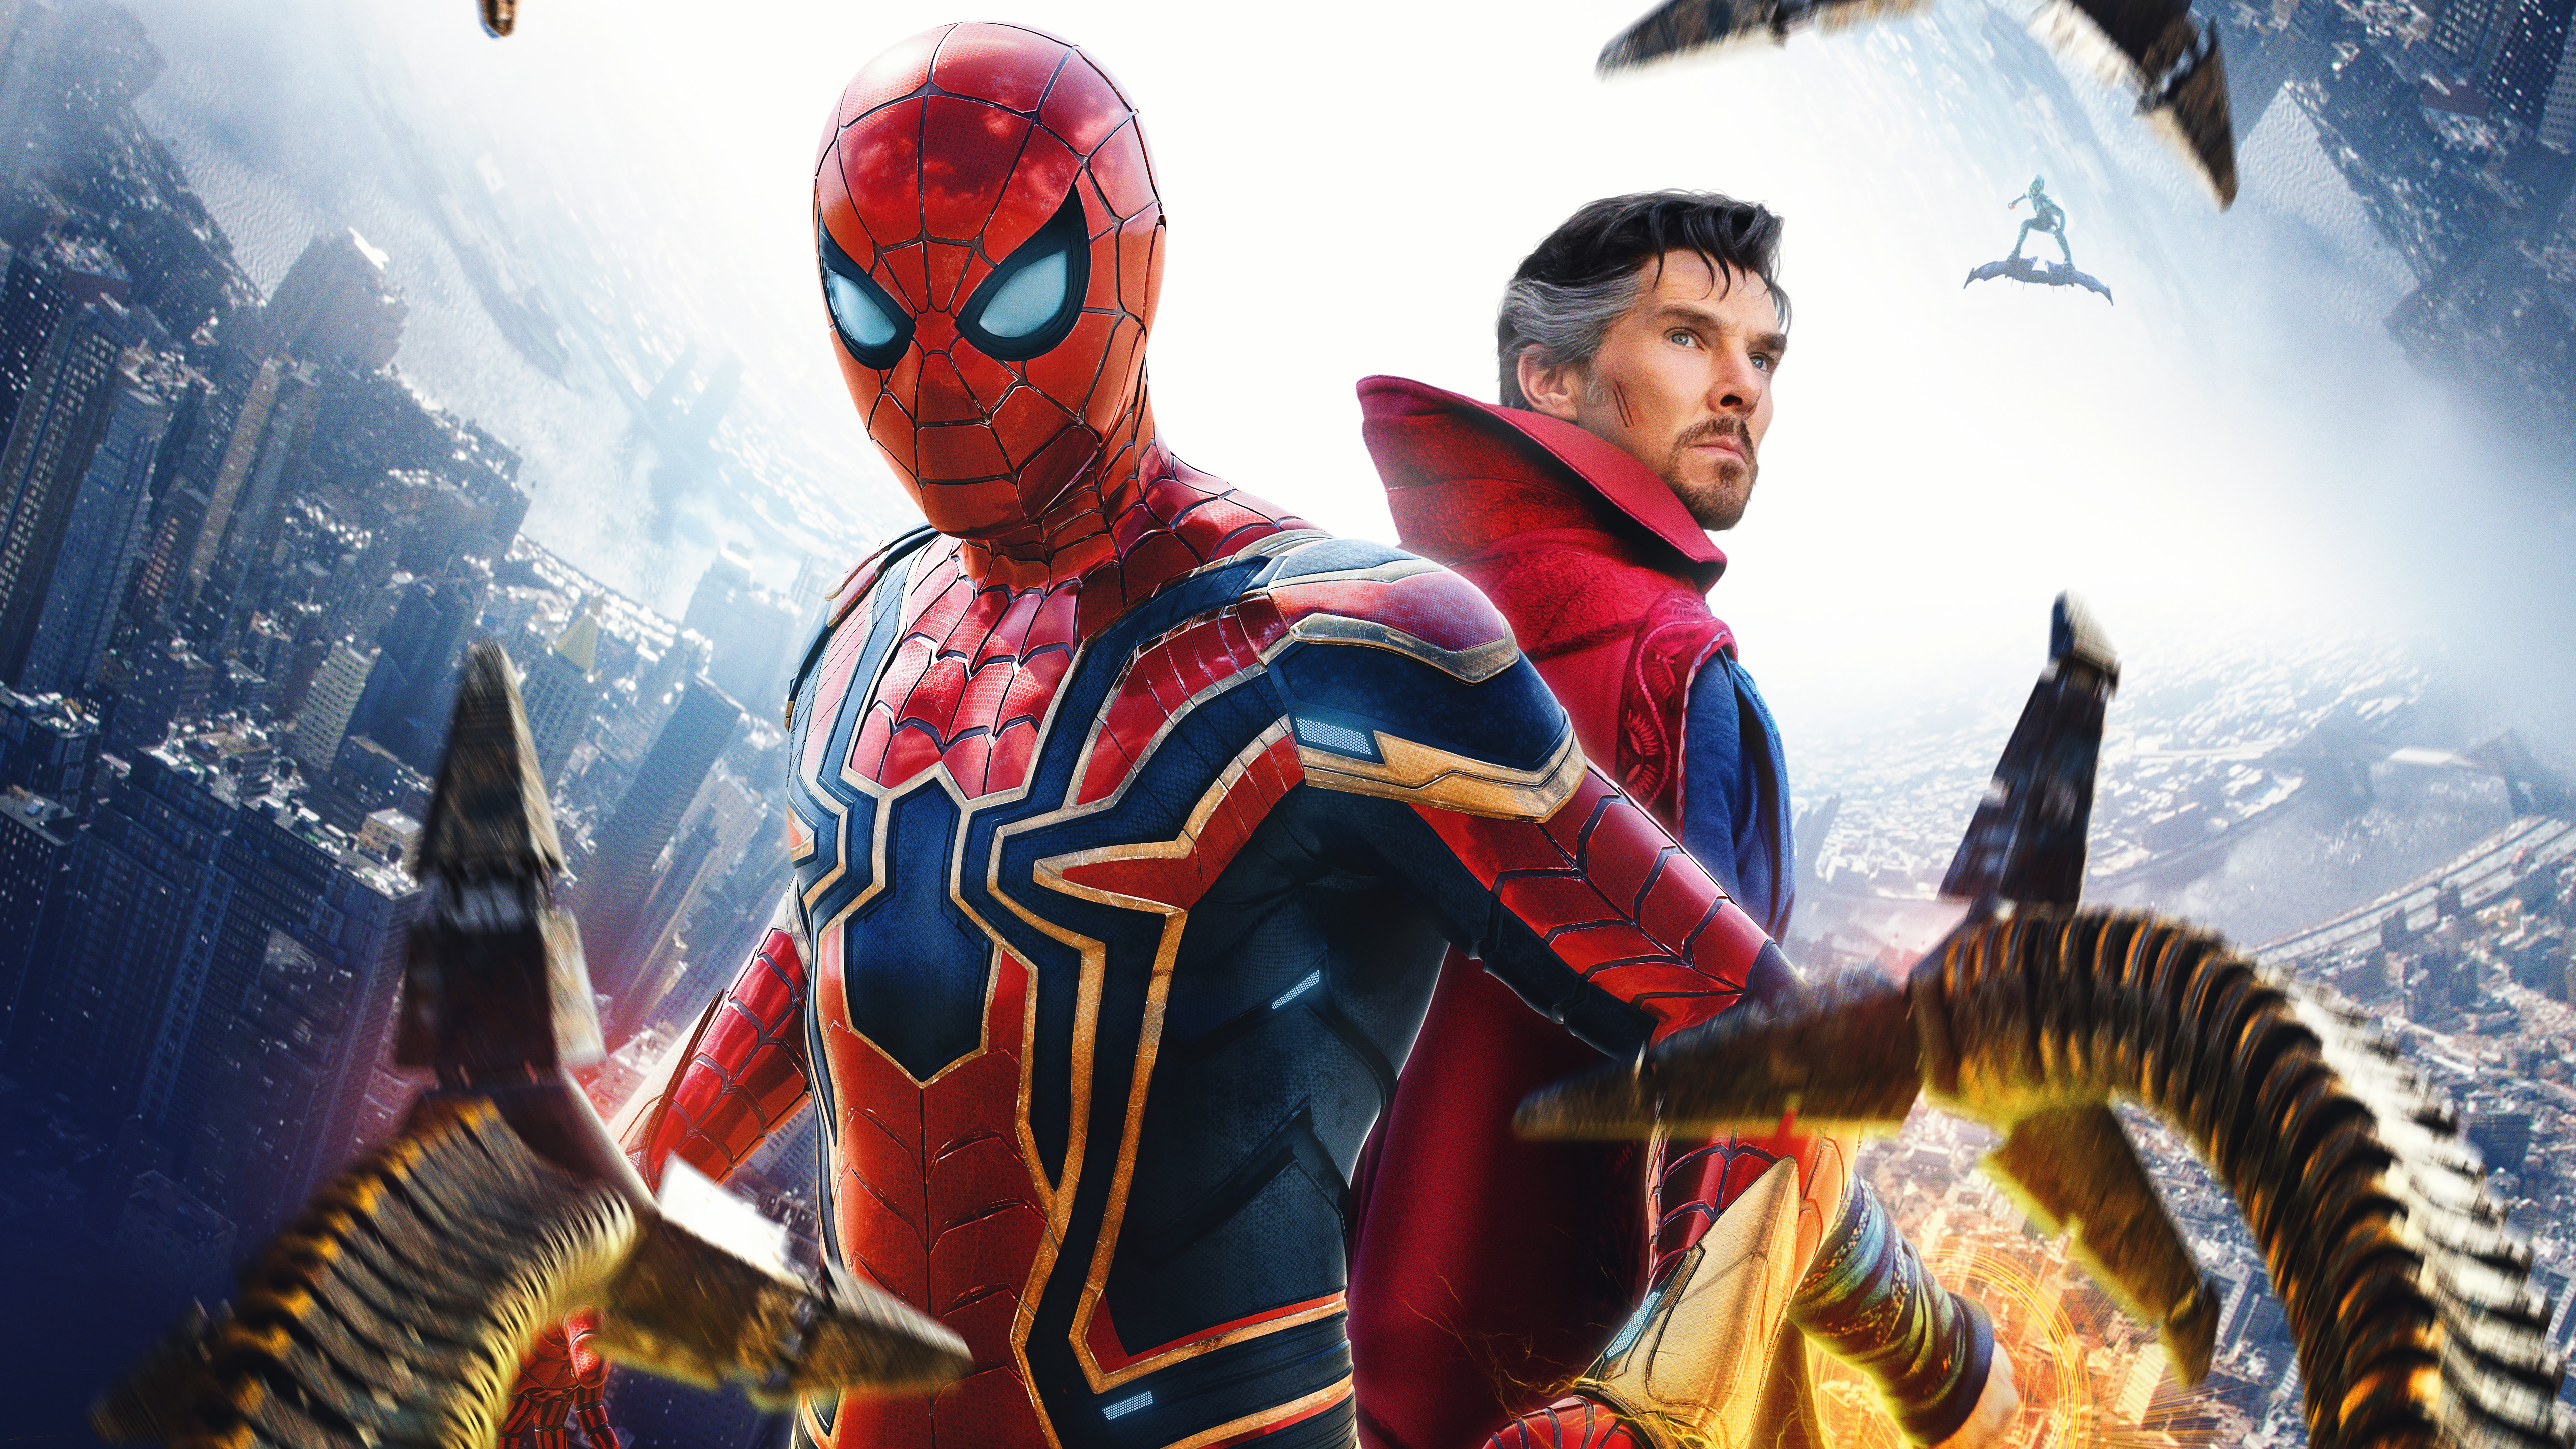 Spider Man and Doctor Strange in No way home Wallpaper 8k Ultra HD ID:9059